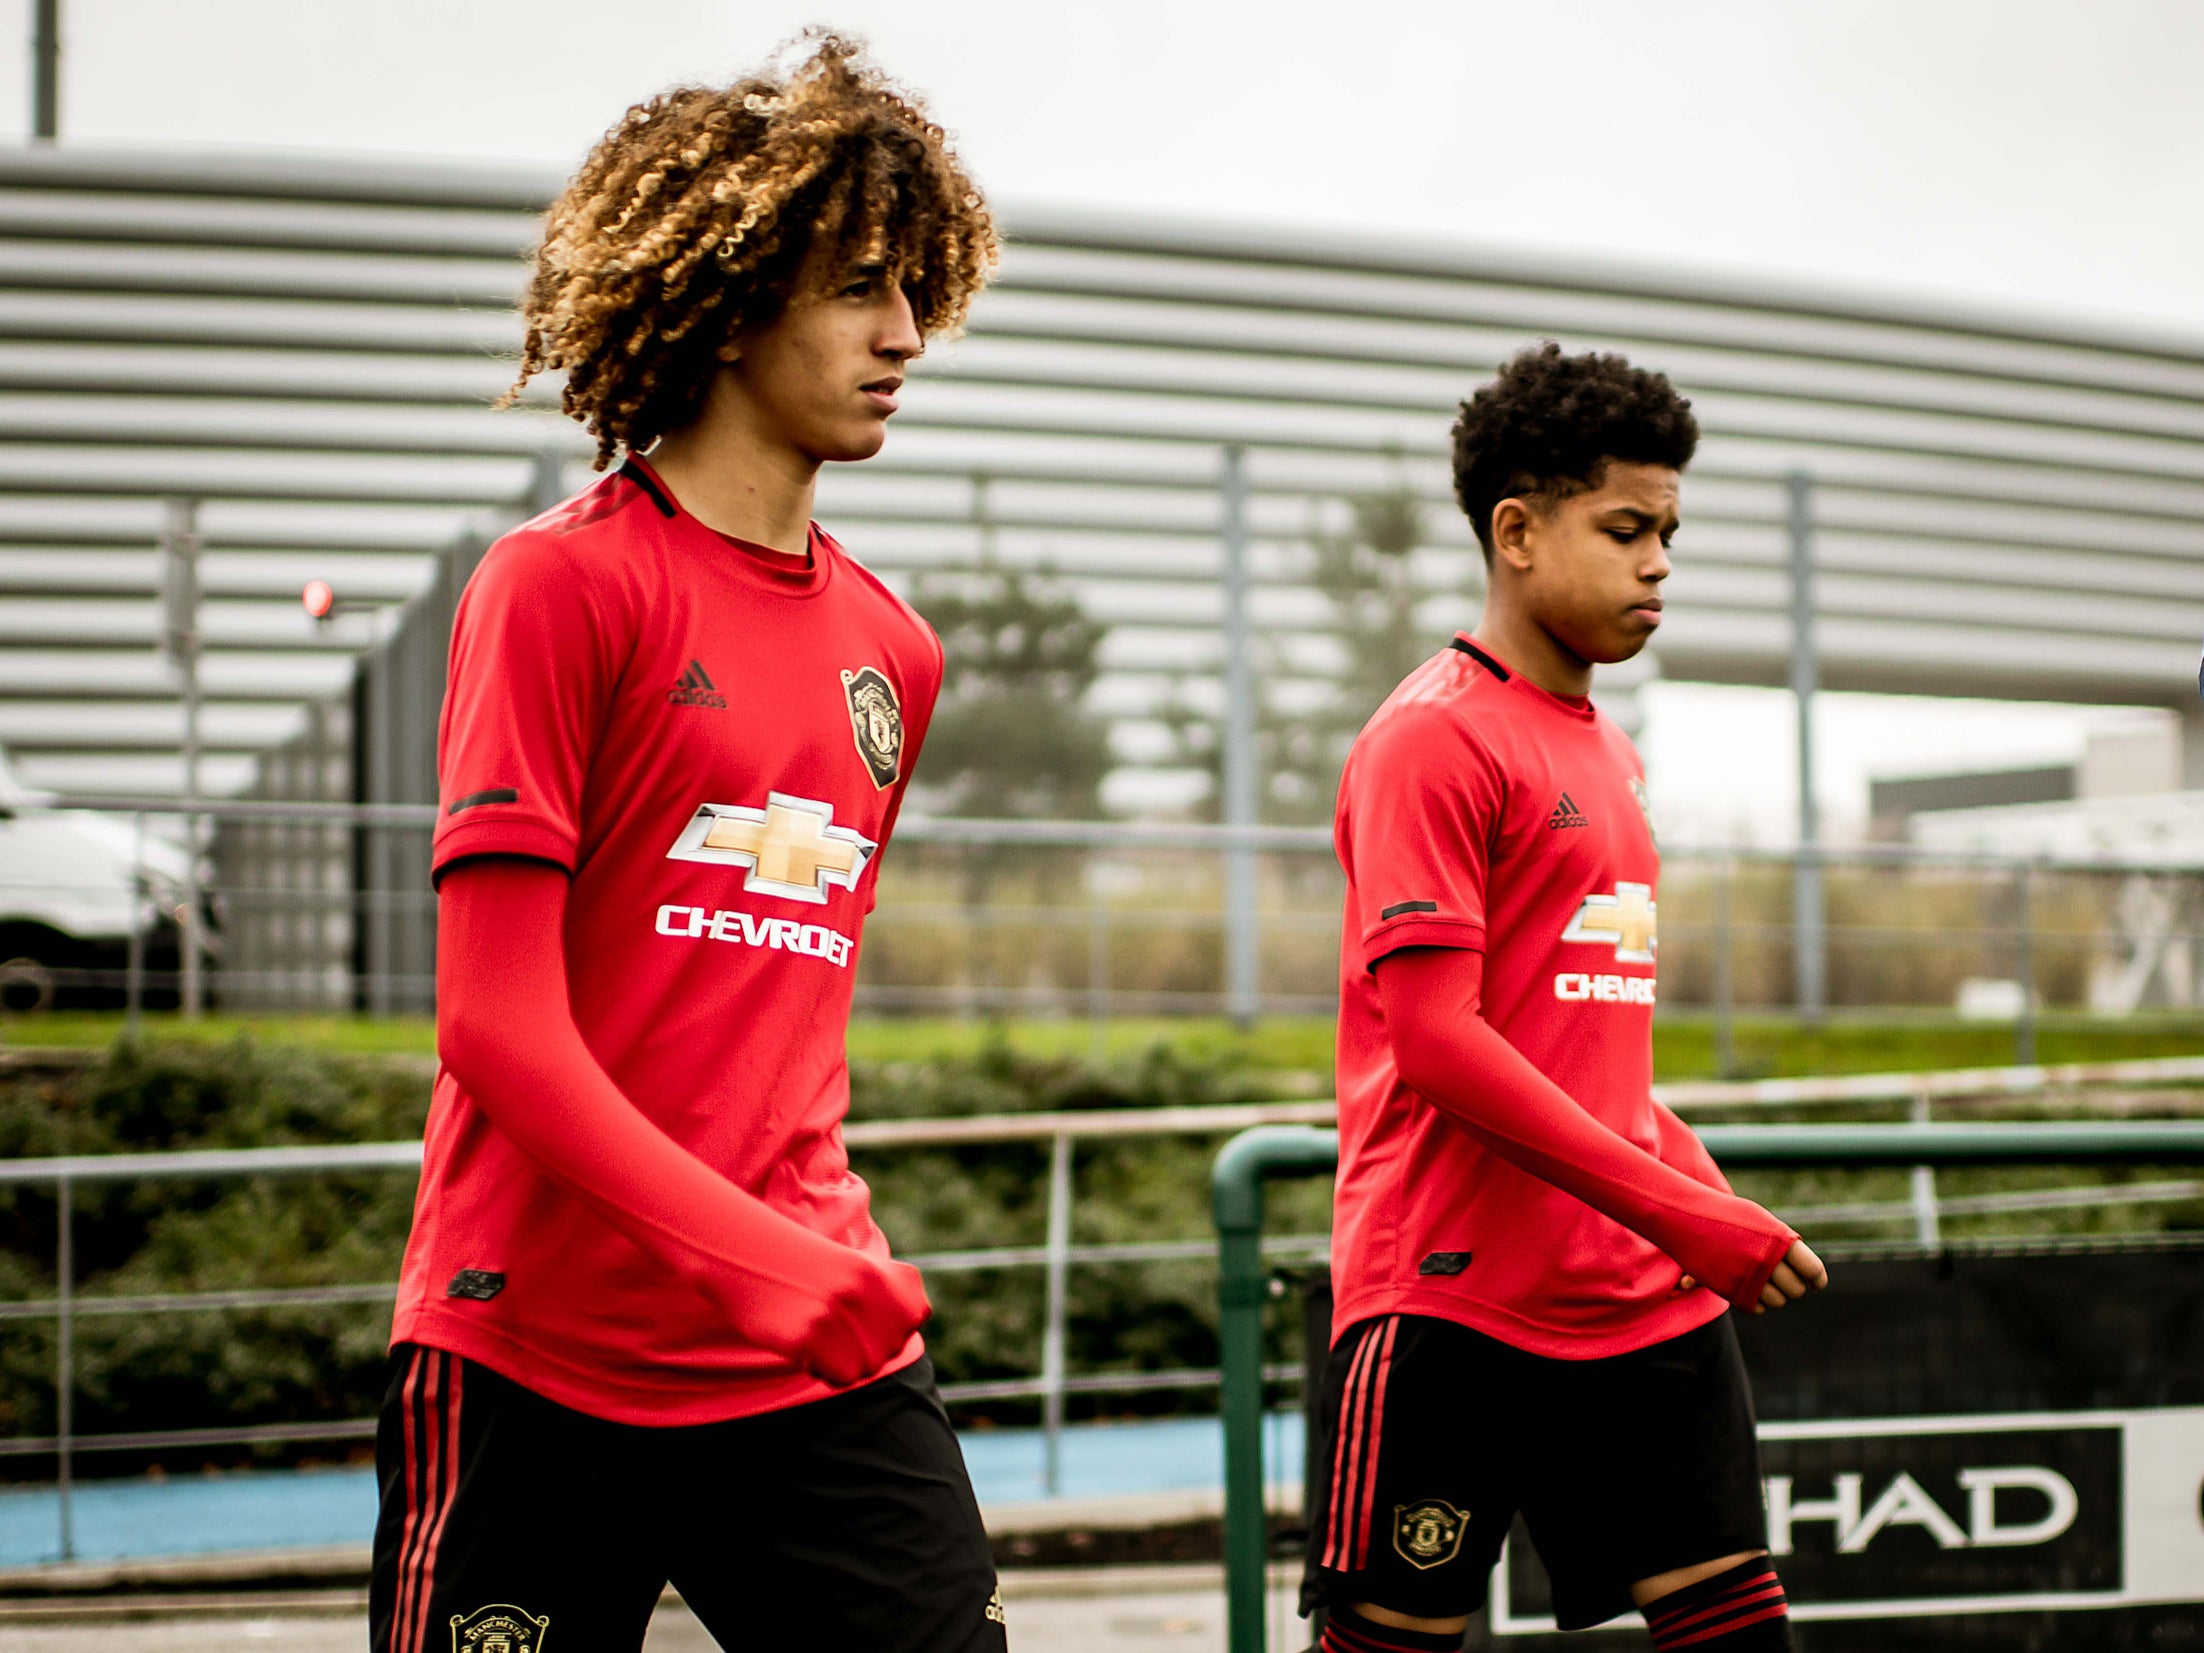 Manchester United youngsters Hannibal Mejbri and Shola Shoretire